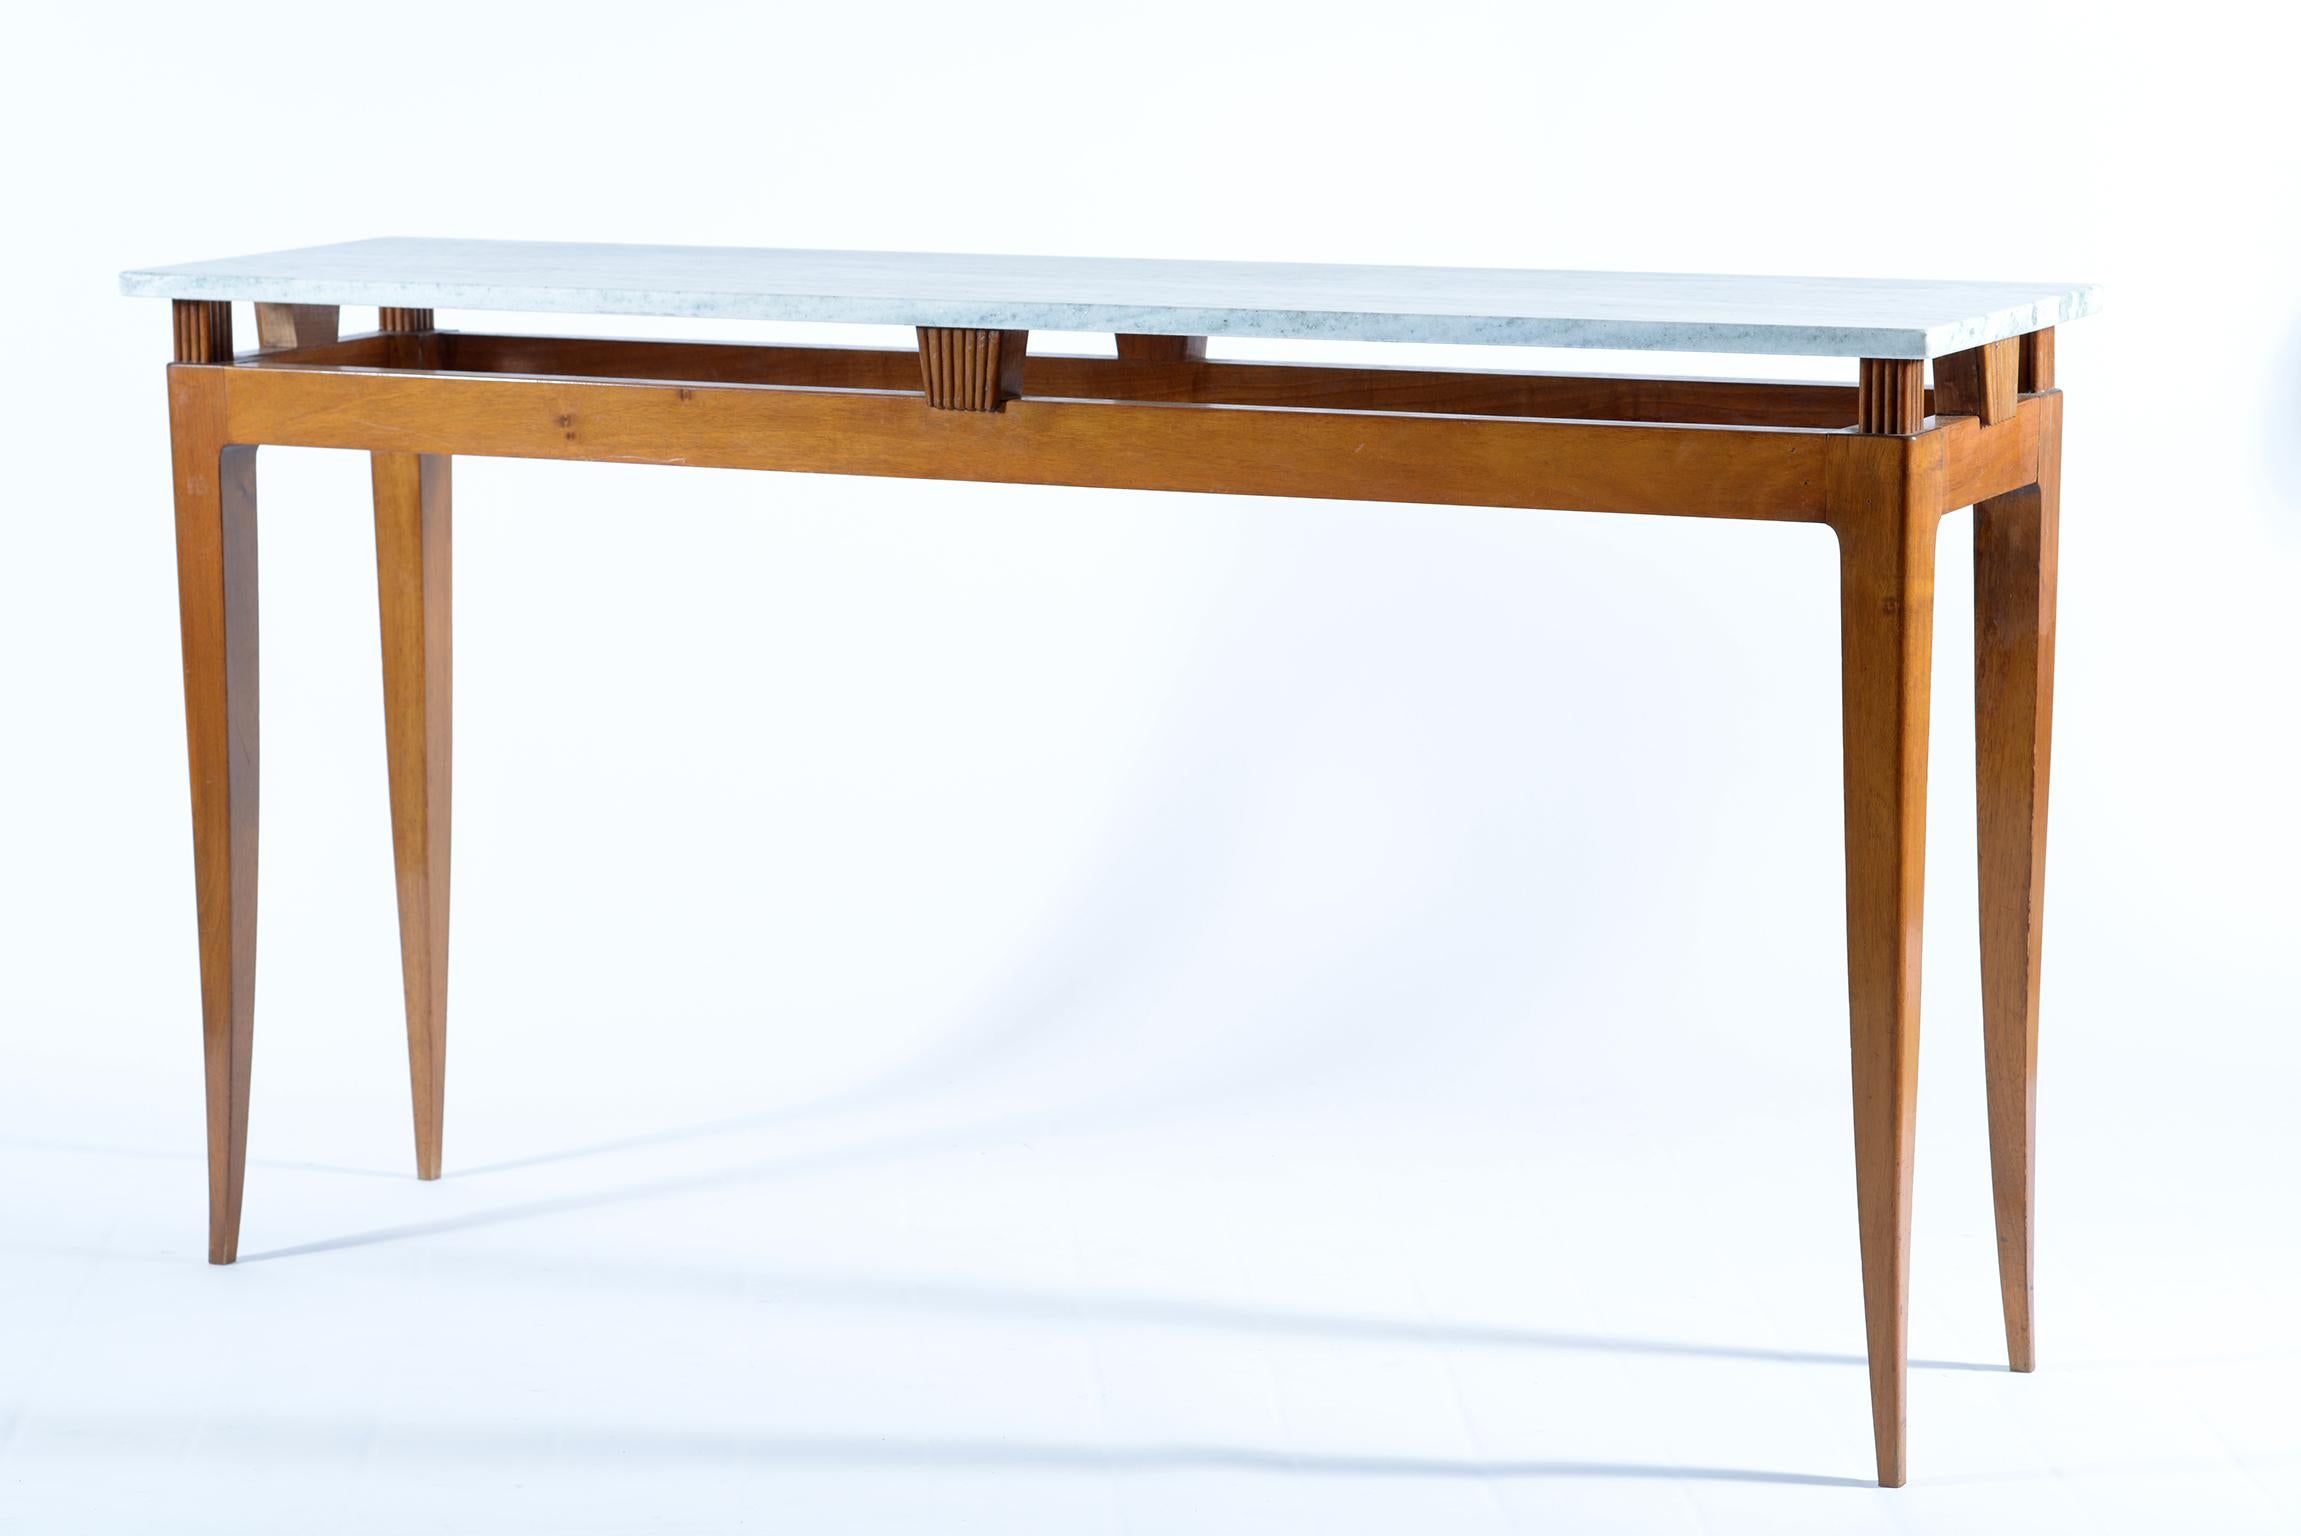 Sculptured solid walnut four slender legs console table, finished on the back too, can be put against the wall or in a centre room or behind a sofa.
The top is in a Toscany marble called 